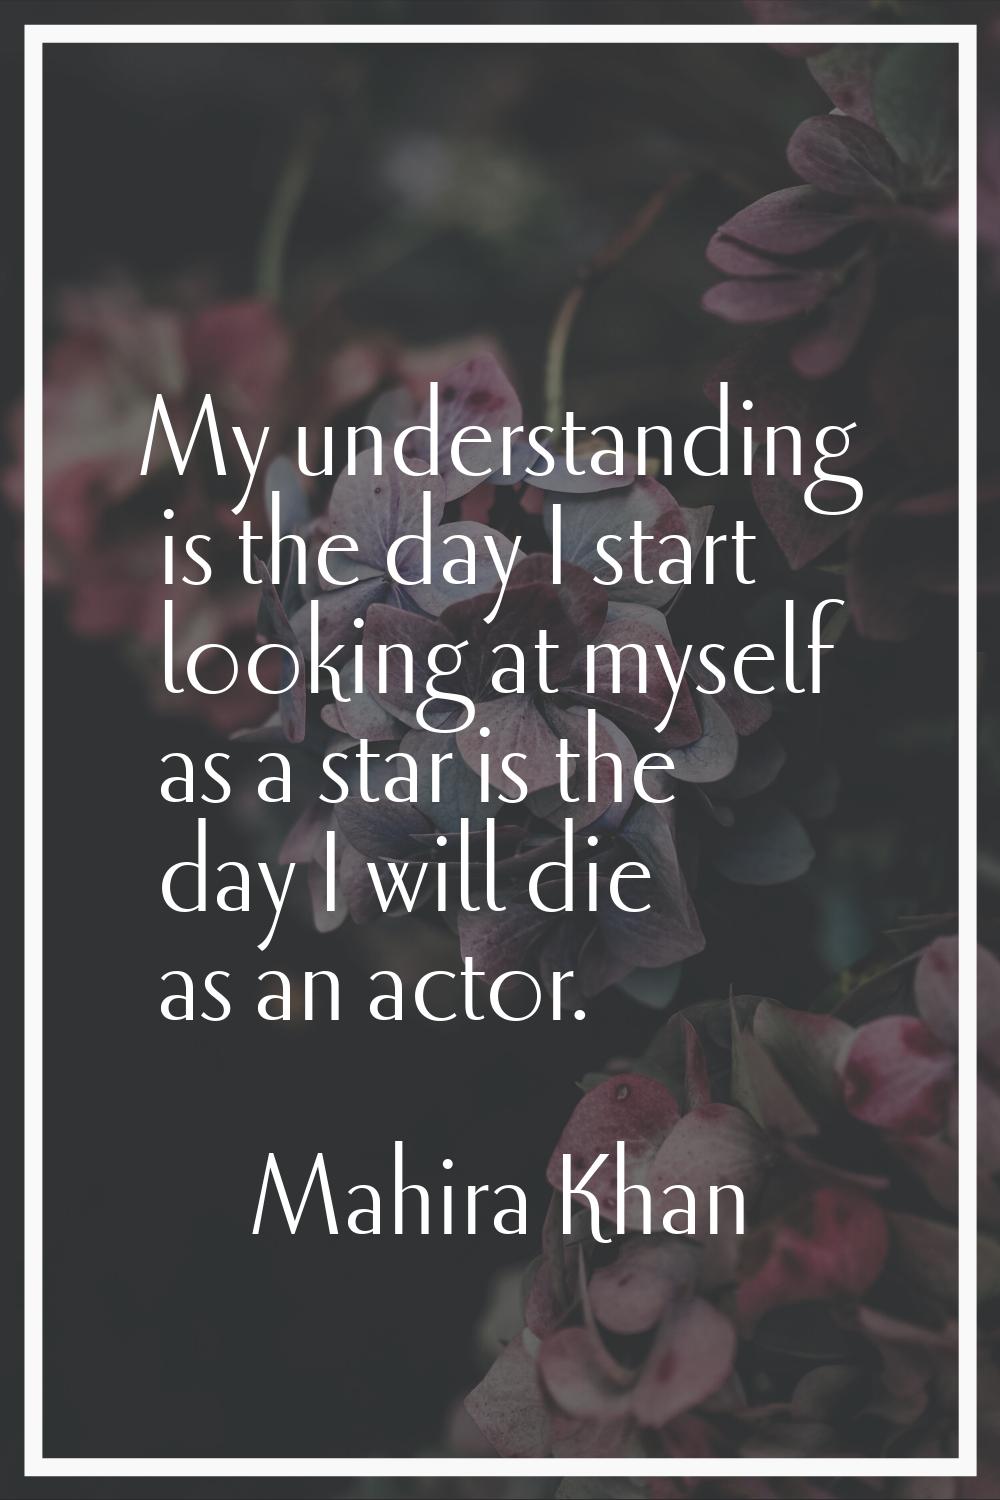 My understanding is the day I start looking at myself as a star is the day I will die as an actor.